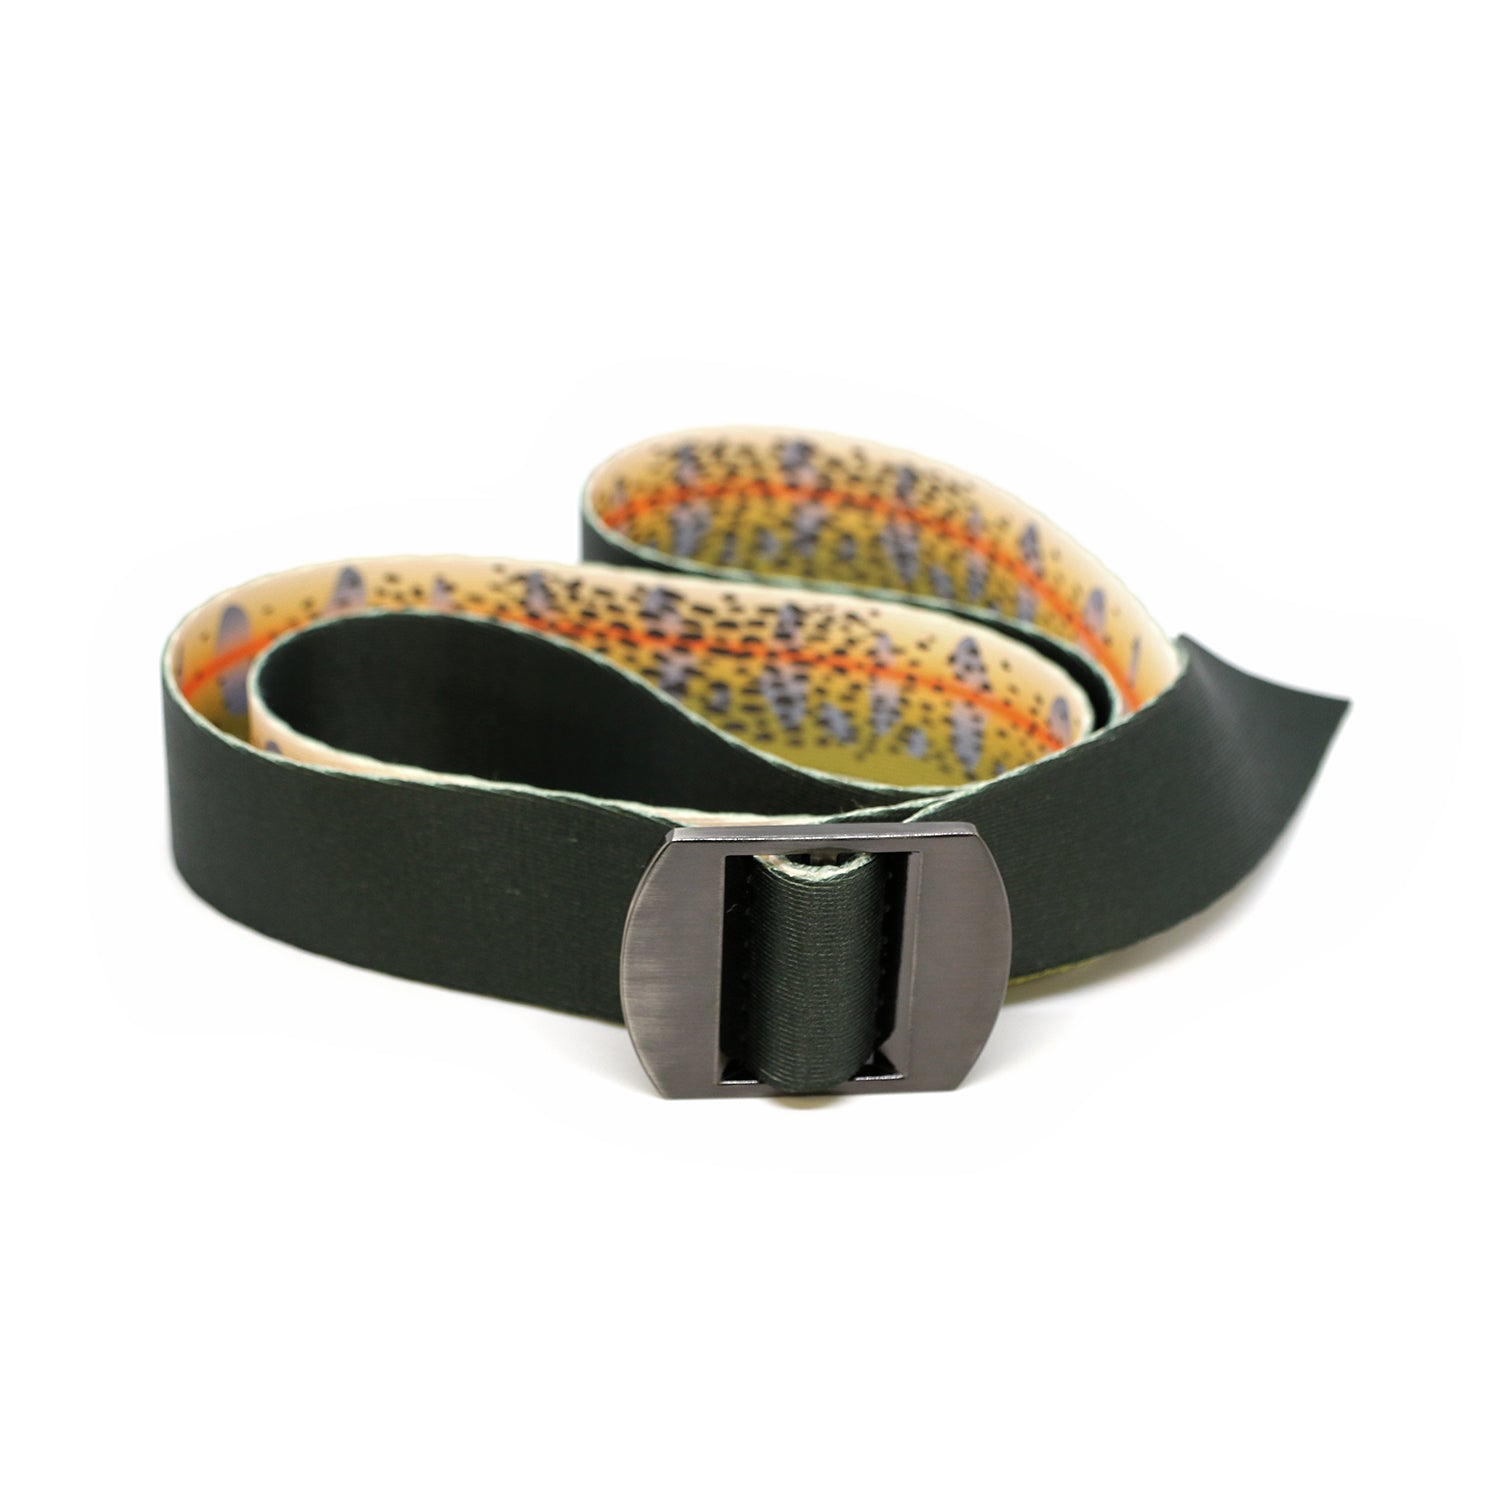 A nylon belt with a metal buckle has cutthroat trout print, reversed to show the black backside